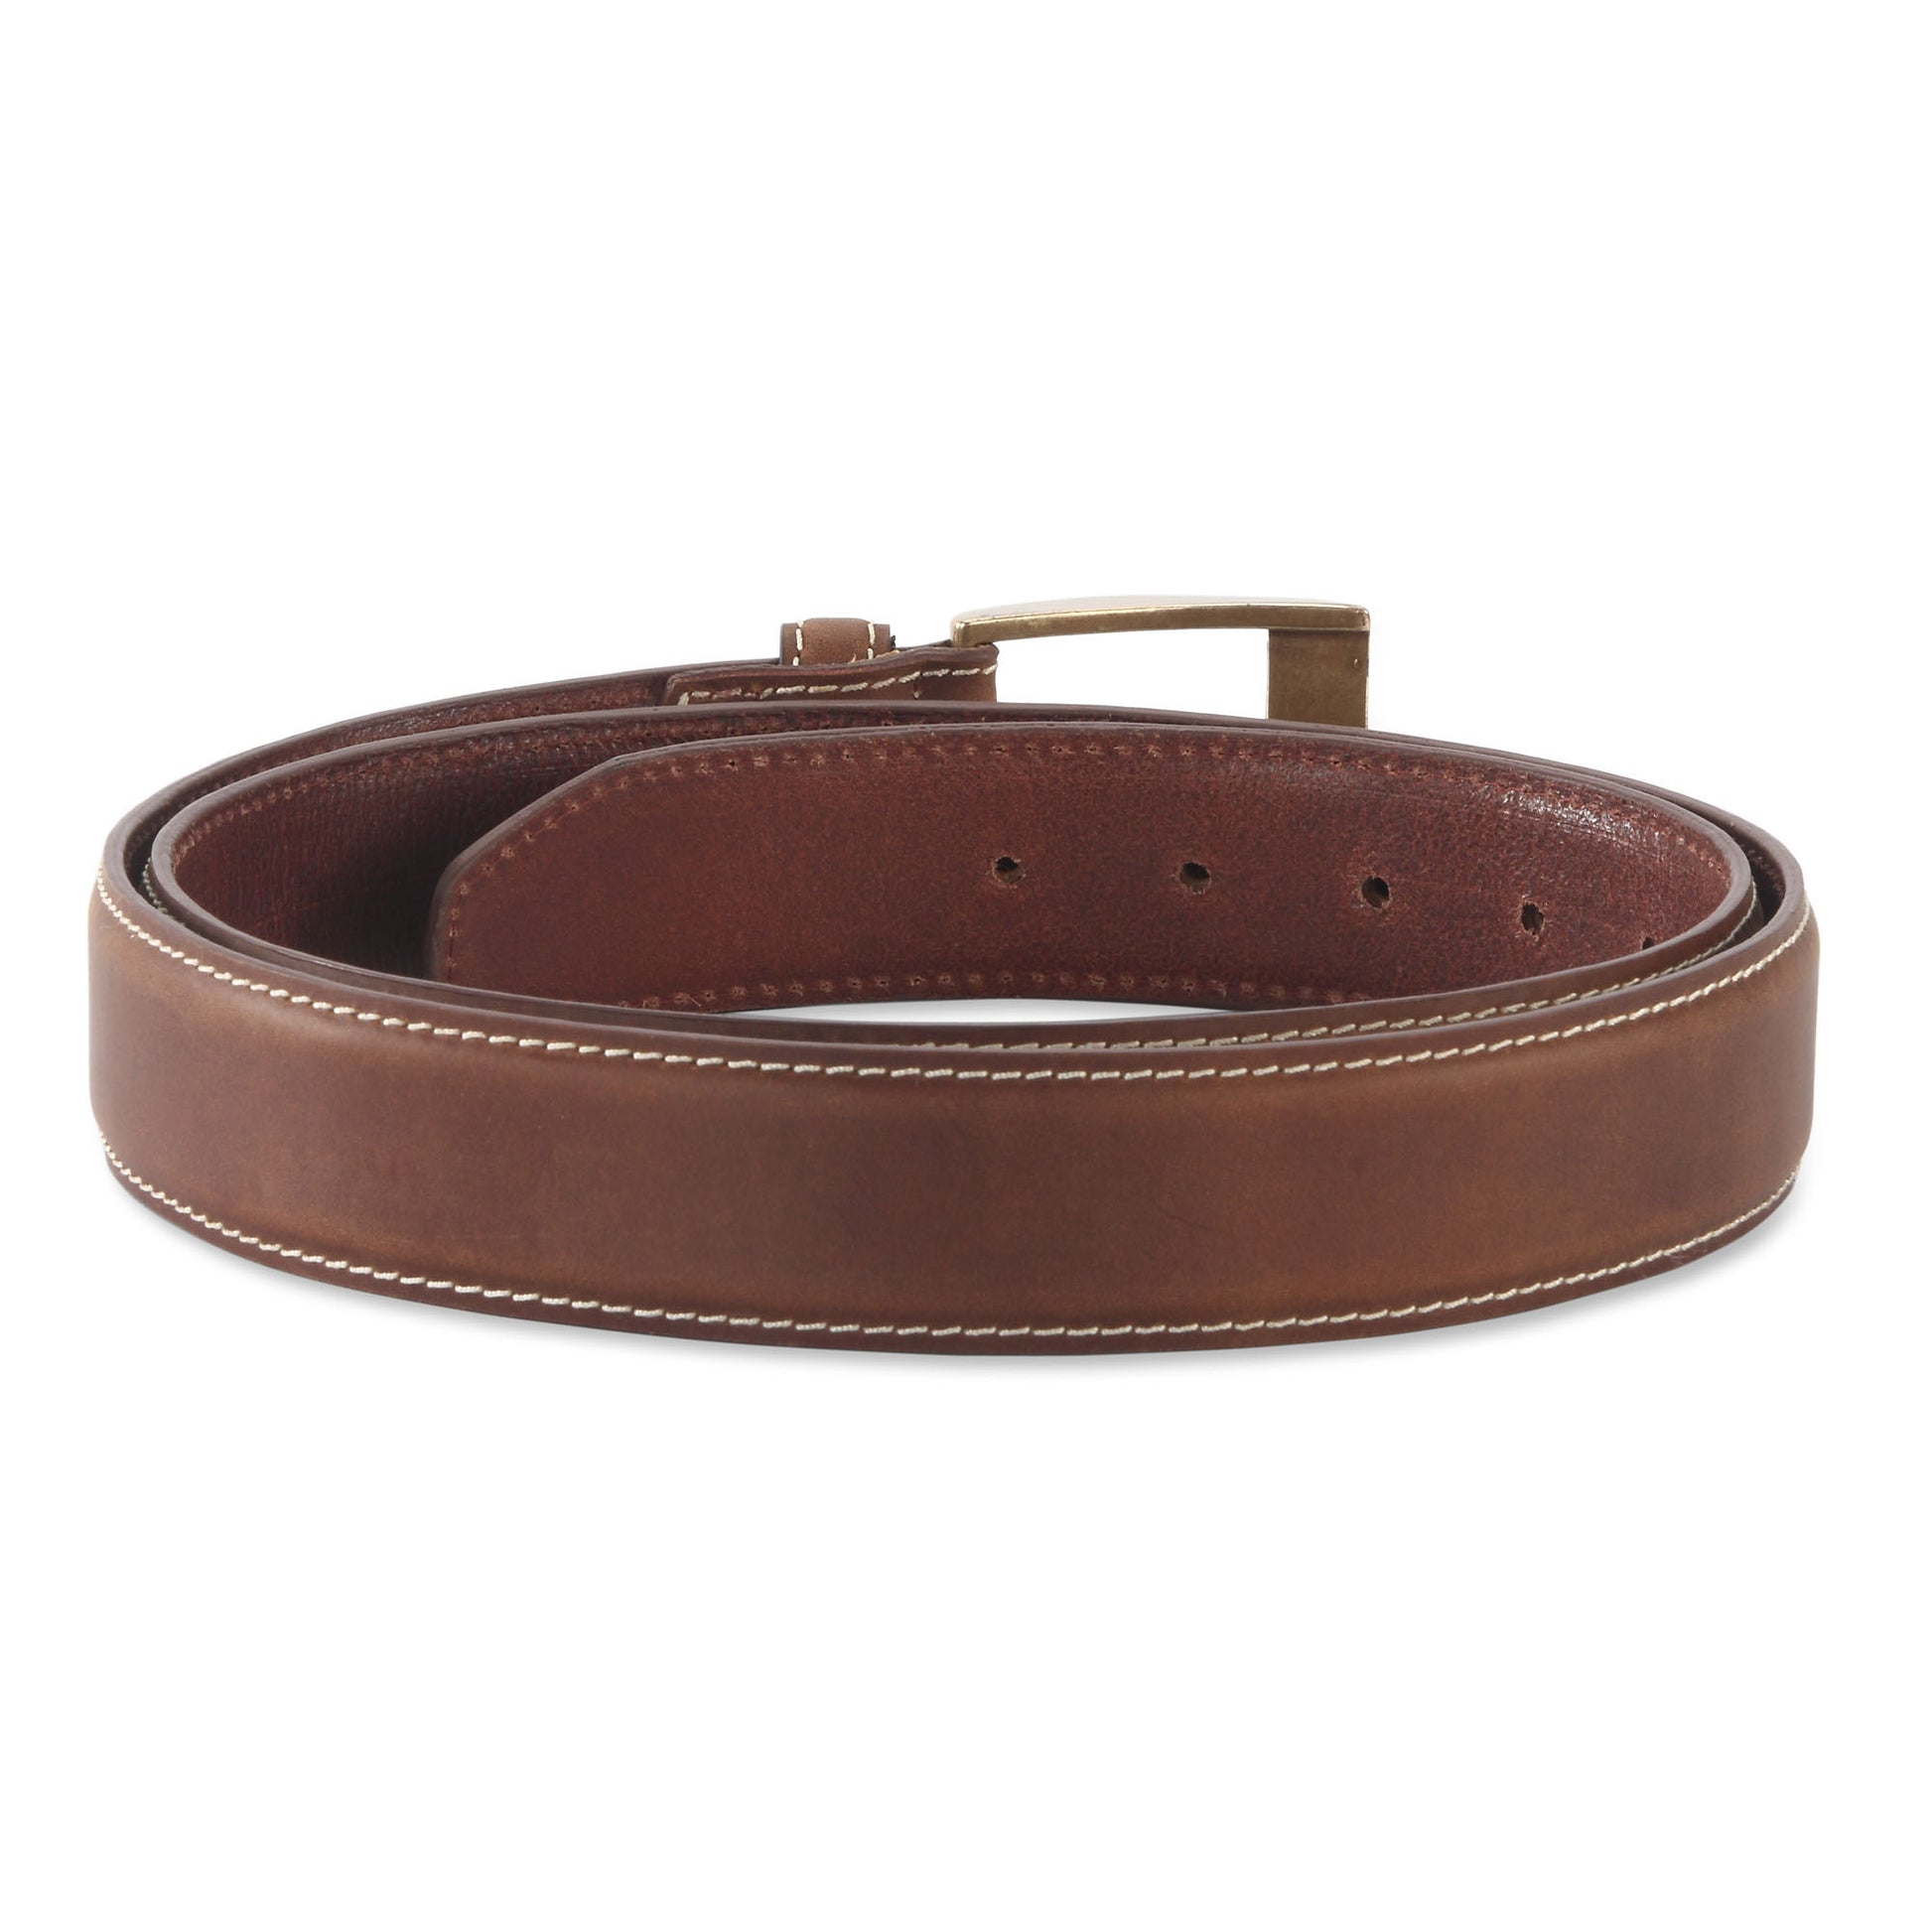 391902 - one and a half inch wide leather belt in brown color top grain leather - back view